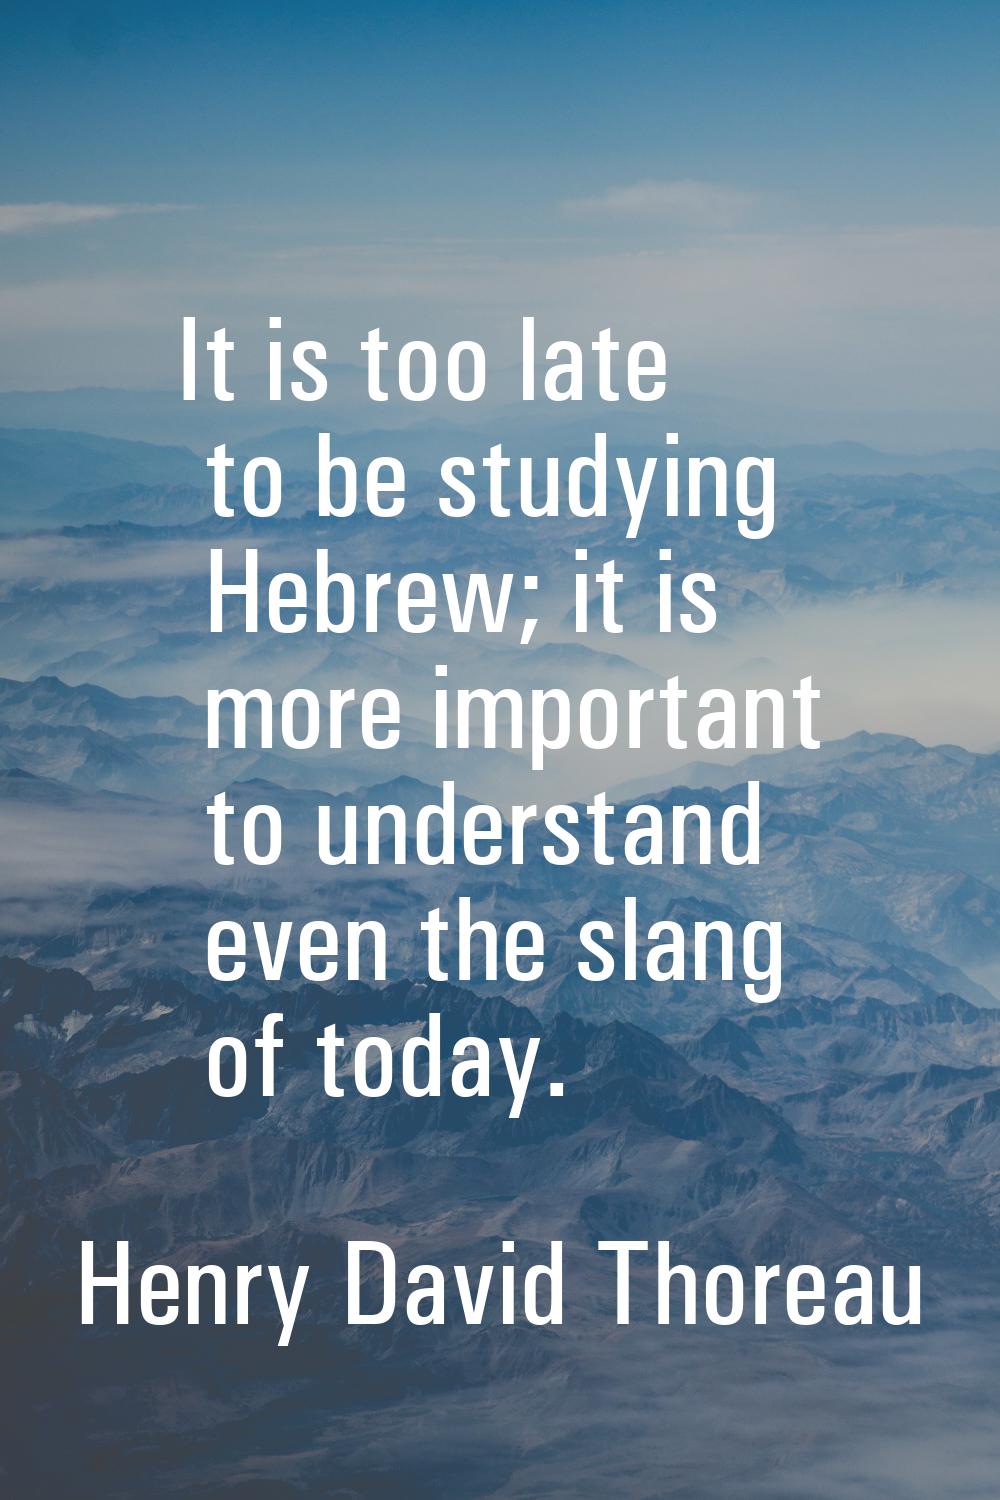 It is too late to be studying Hebrew; it is more important to understand even the slang of today.